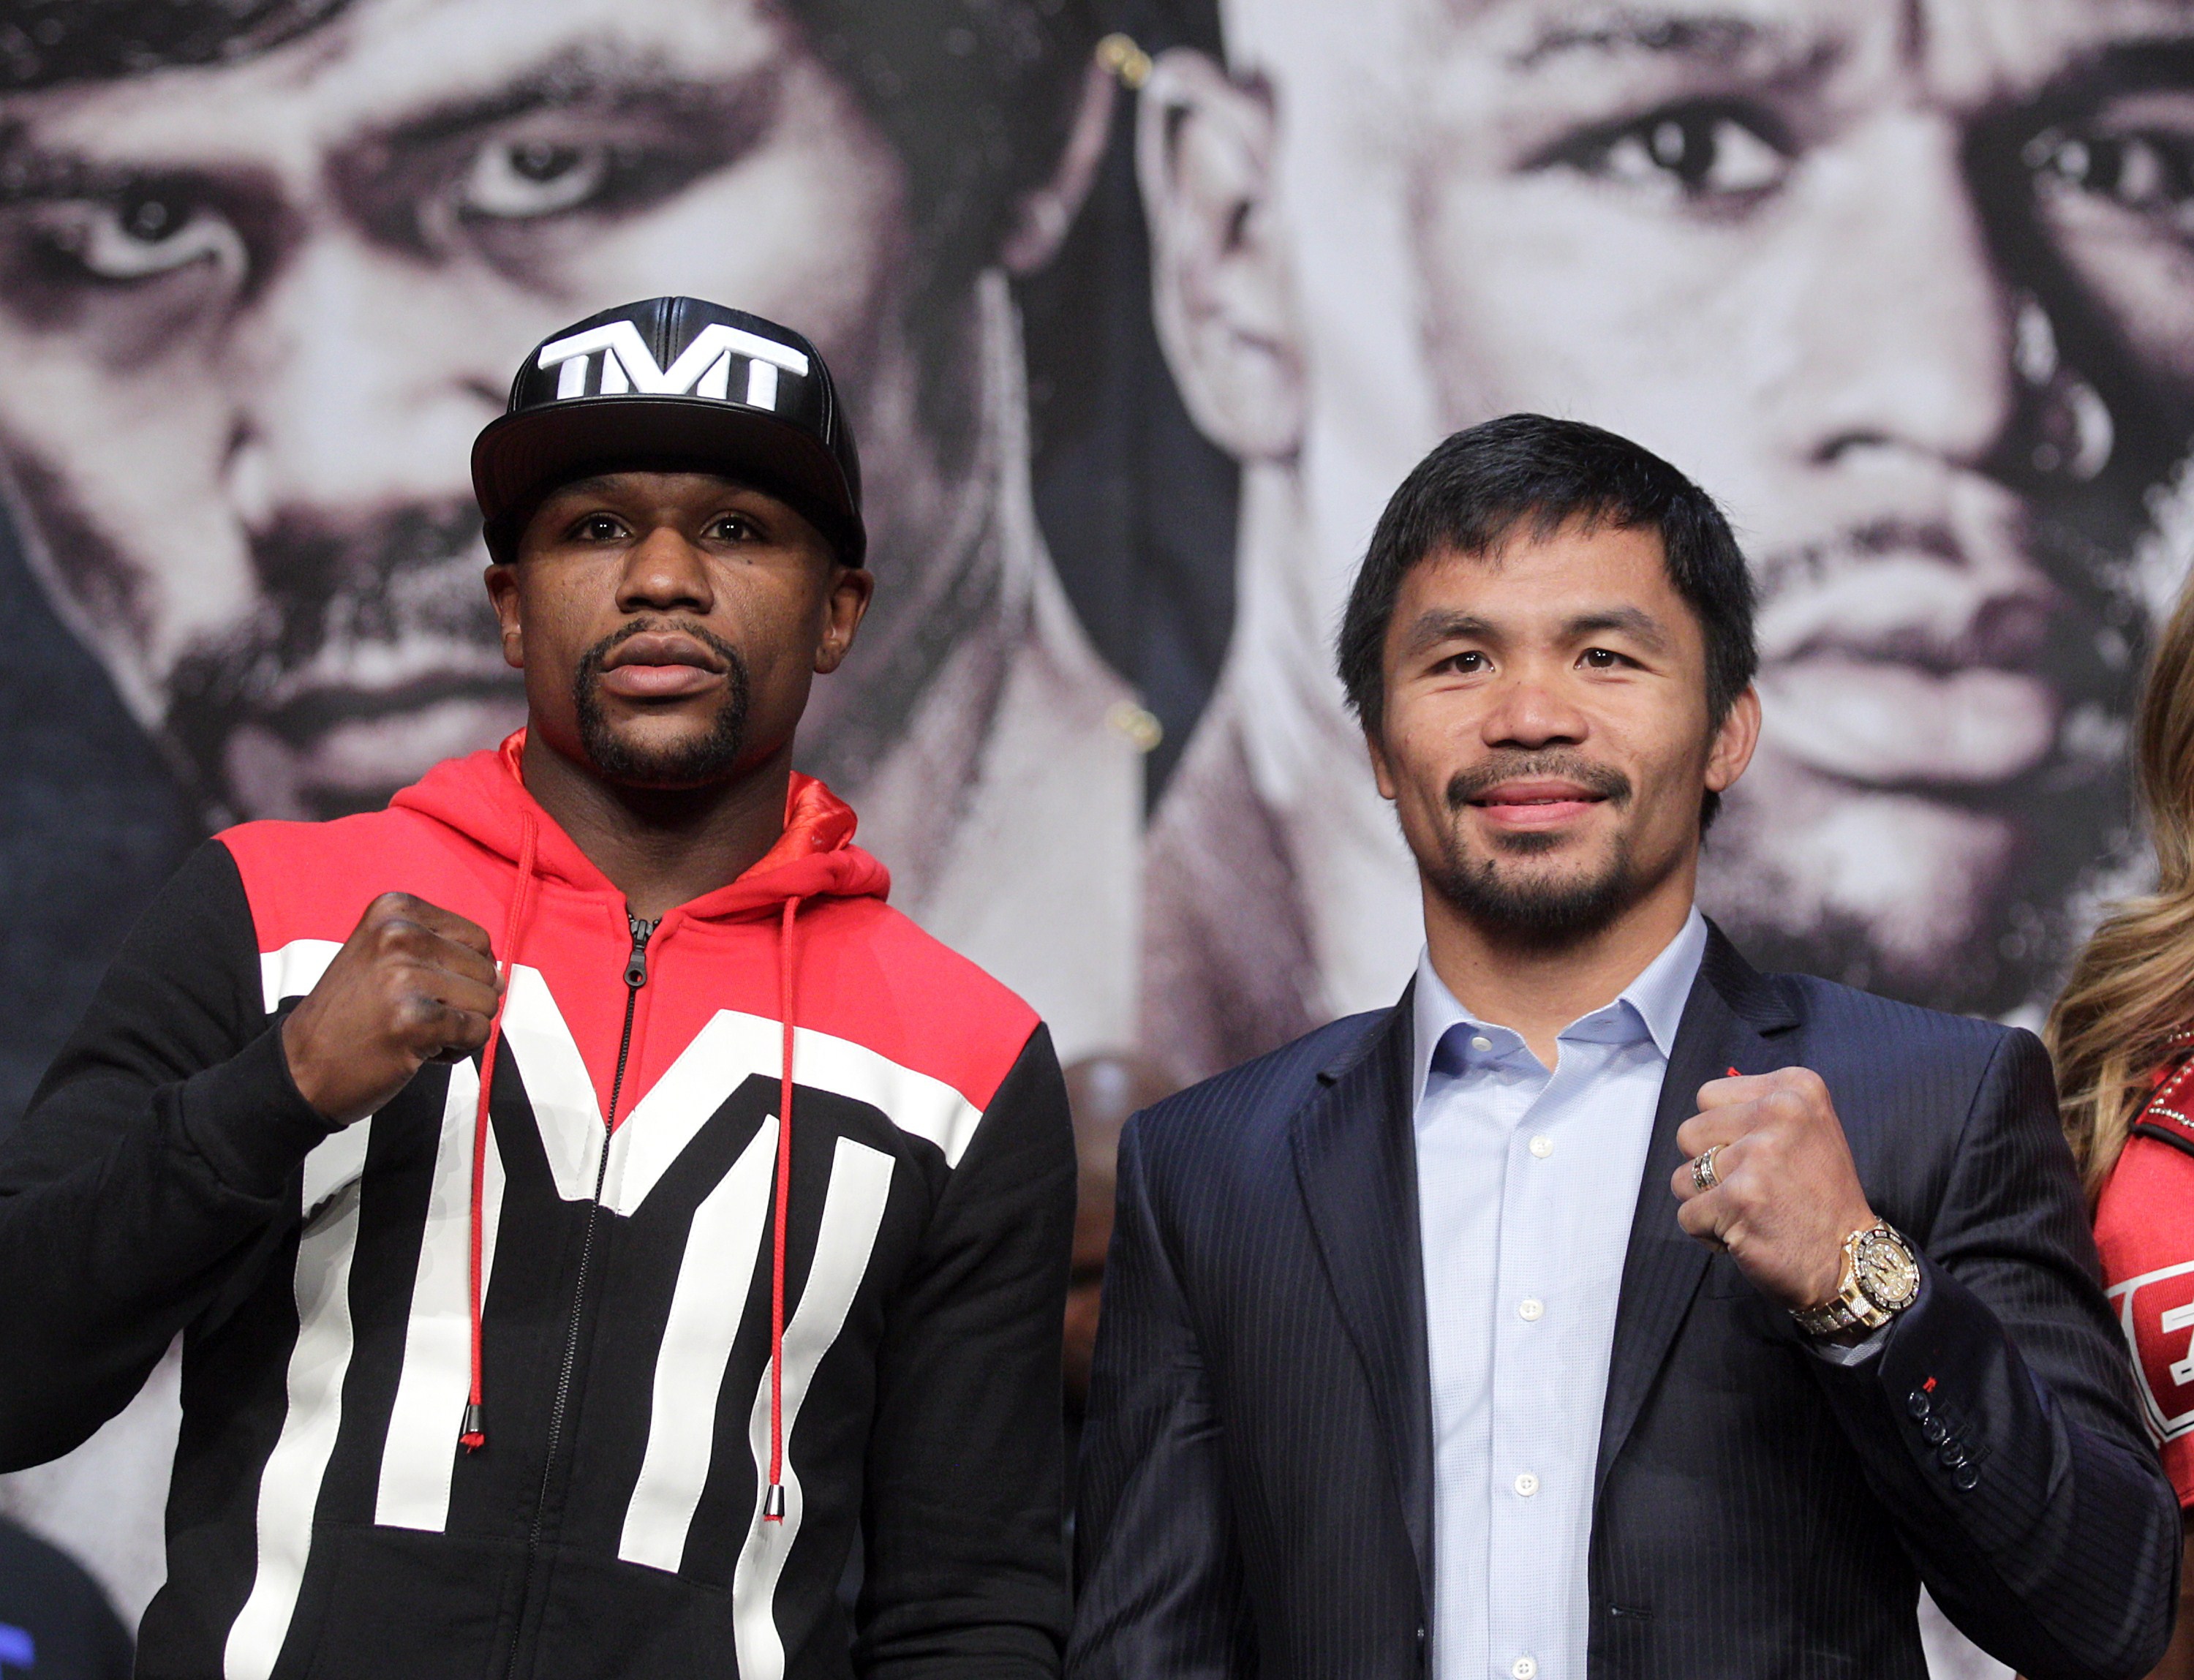 Enjoy it now, guys: Mayweather (left) and Pacquiao are heading for a pounding